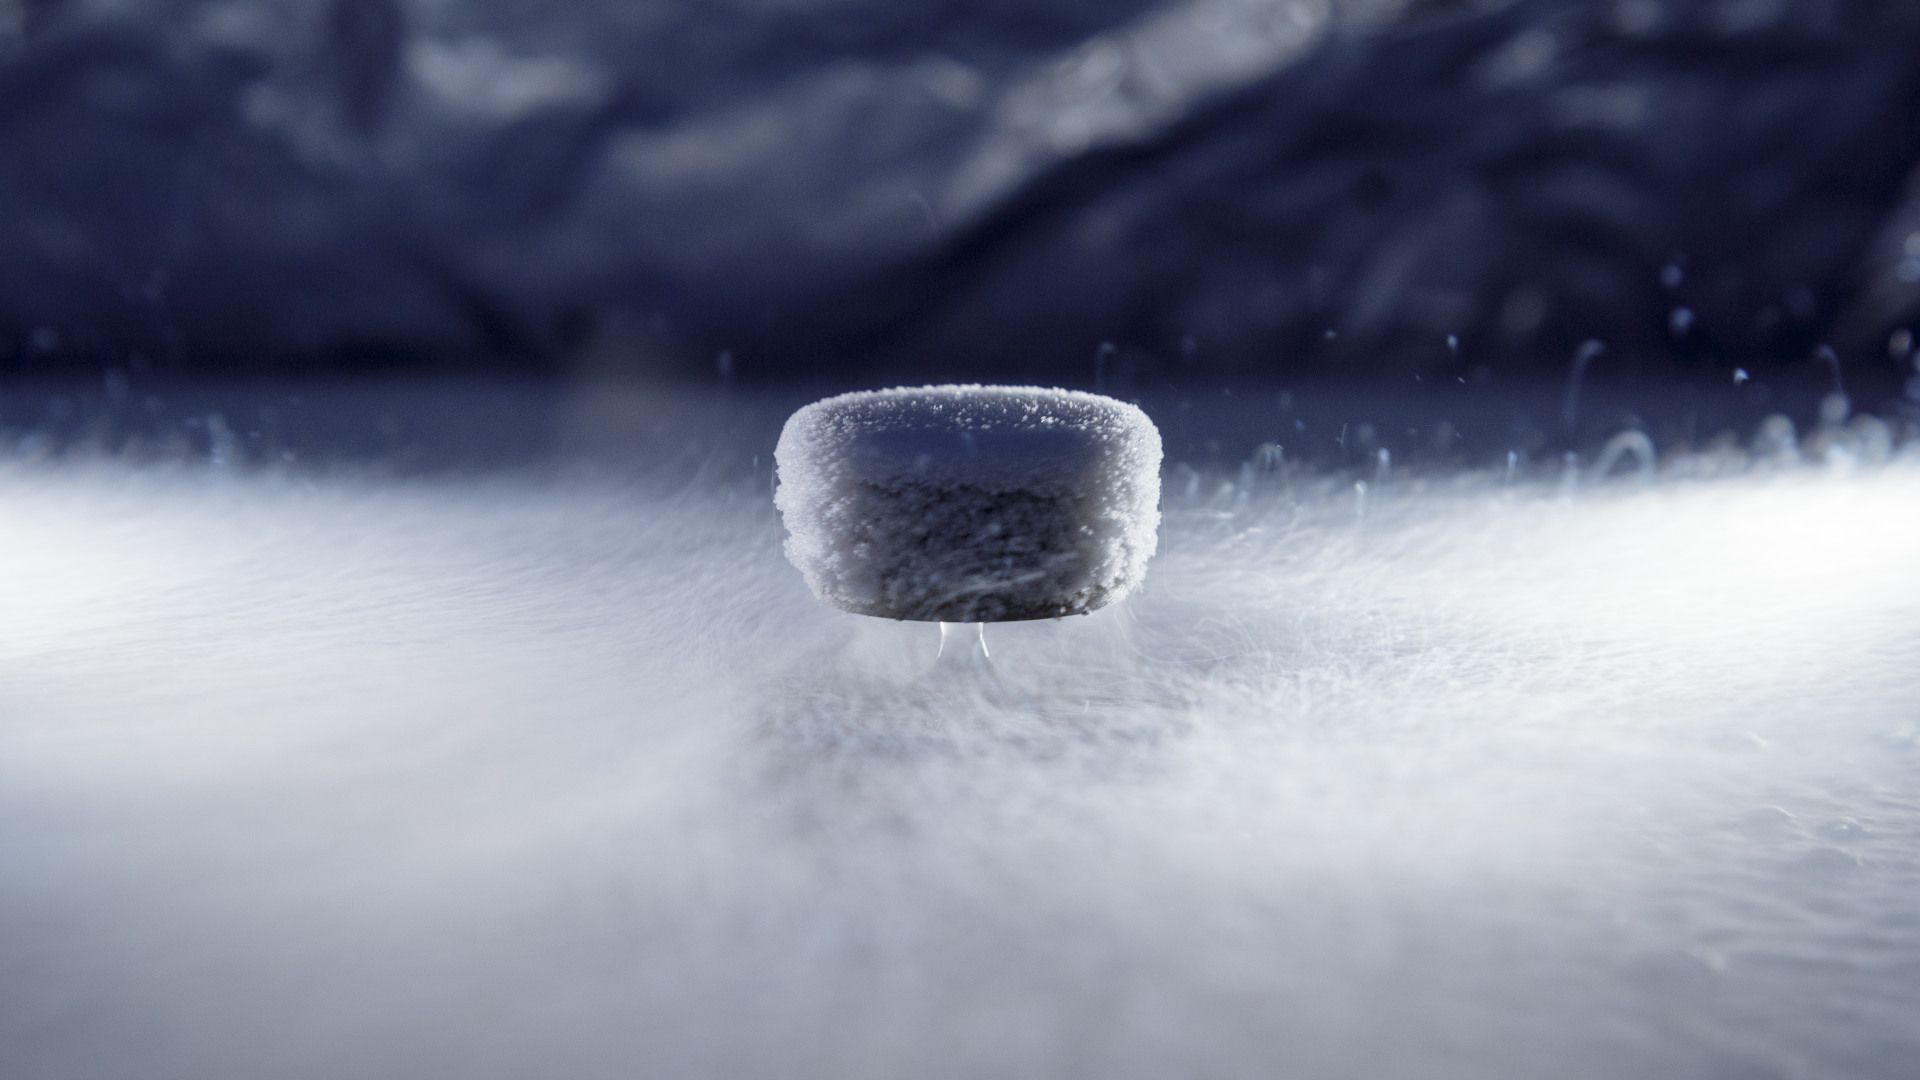 A magnet levitates atop a superconductor, which is shrouded by a layer of mist. A drop of liquid oxygen coalesces between the two materials.